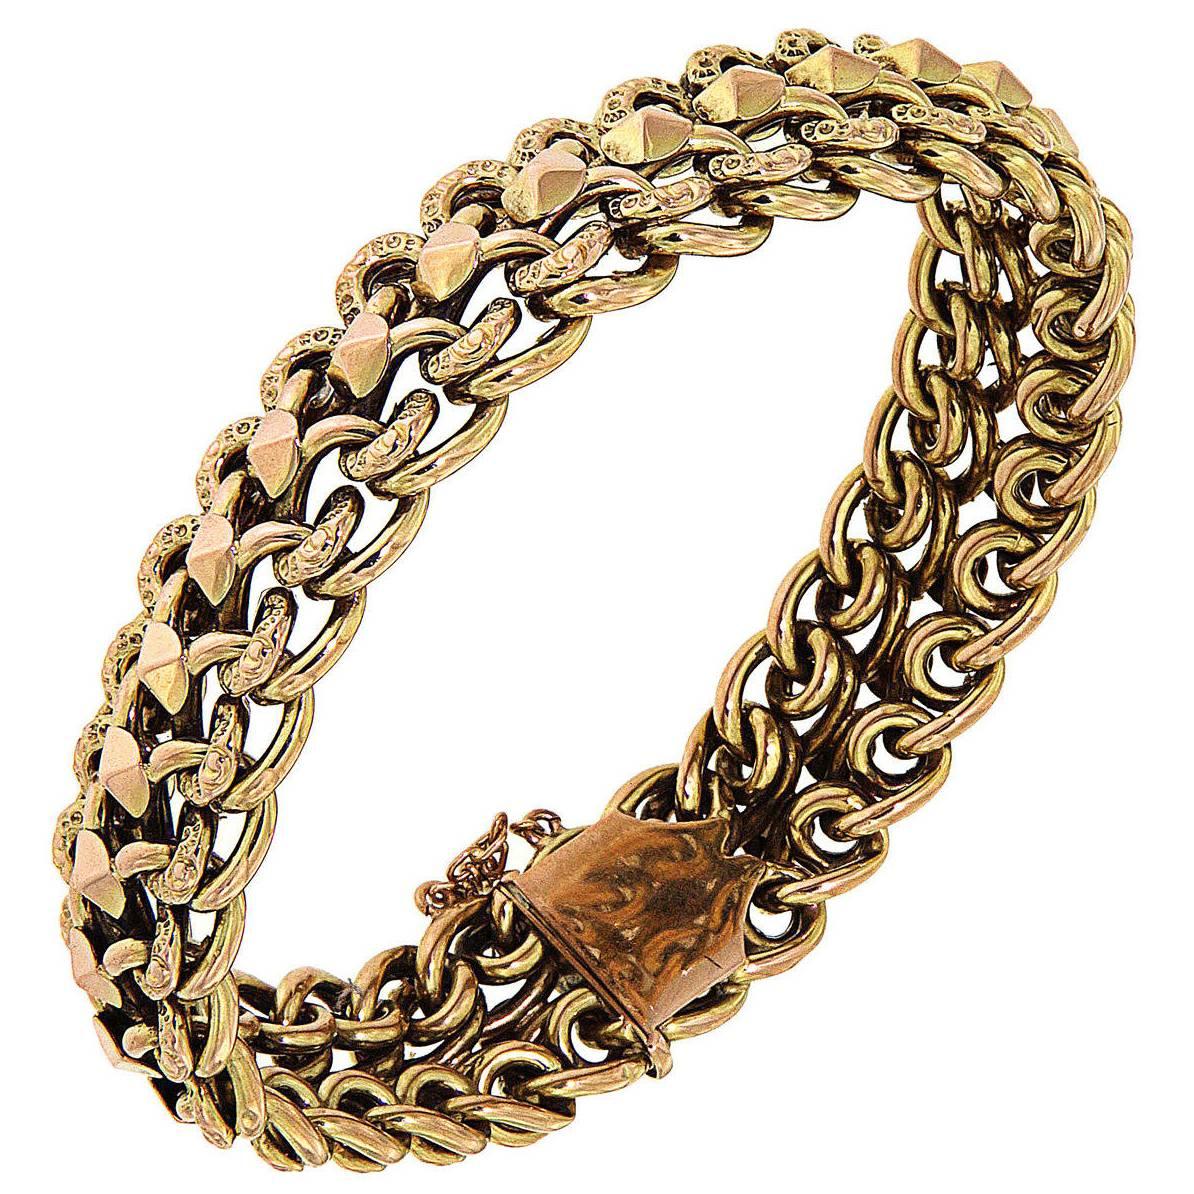 Engraved Yellow Gold Chain Link Bracelet Flexible 1950s 